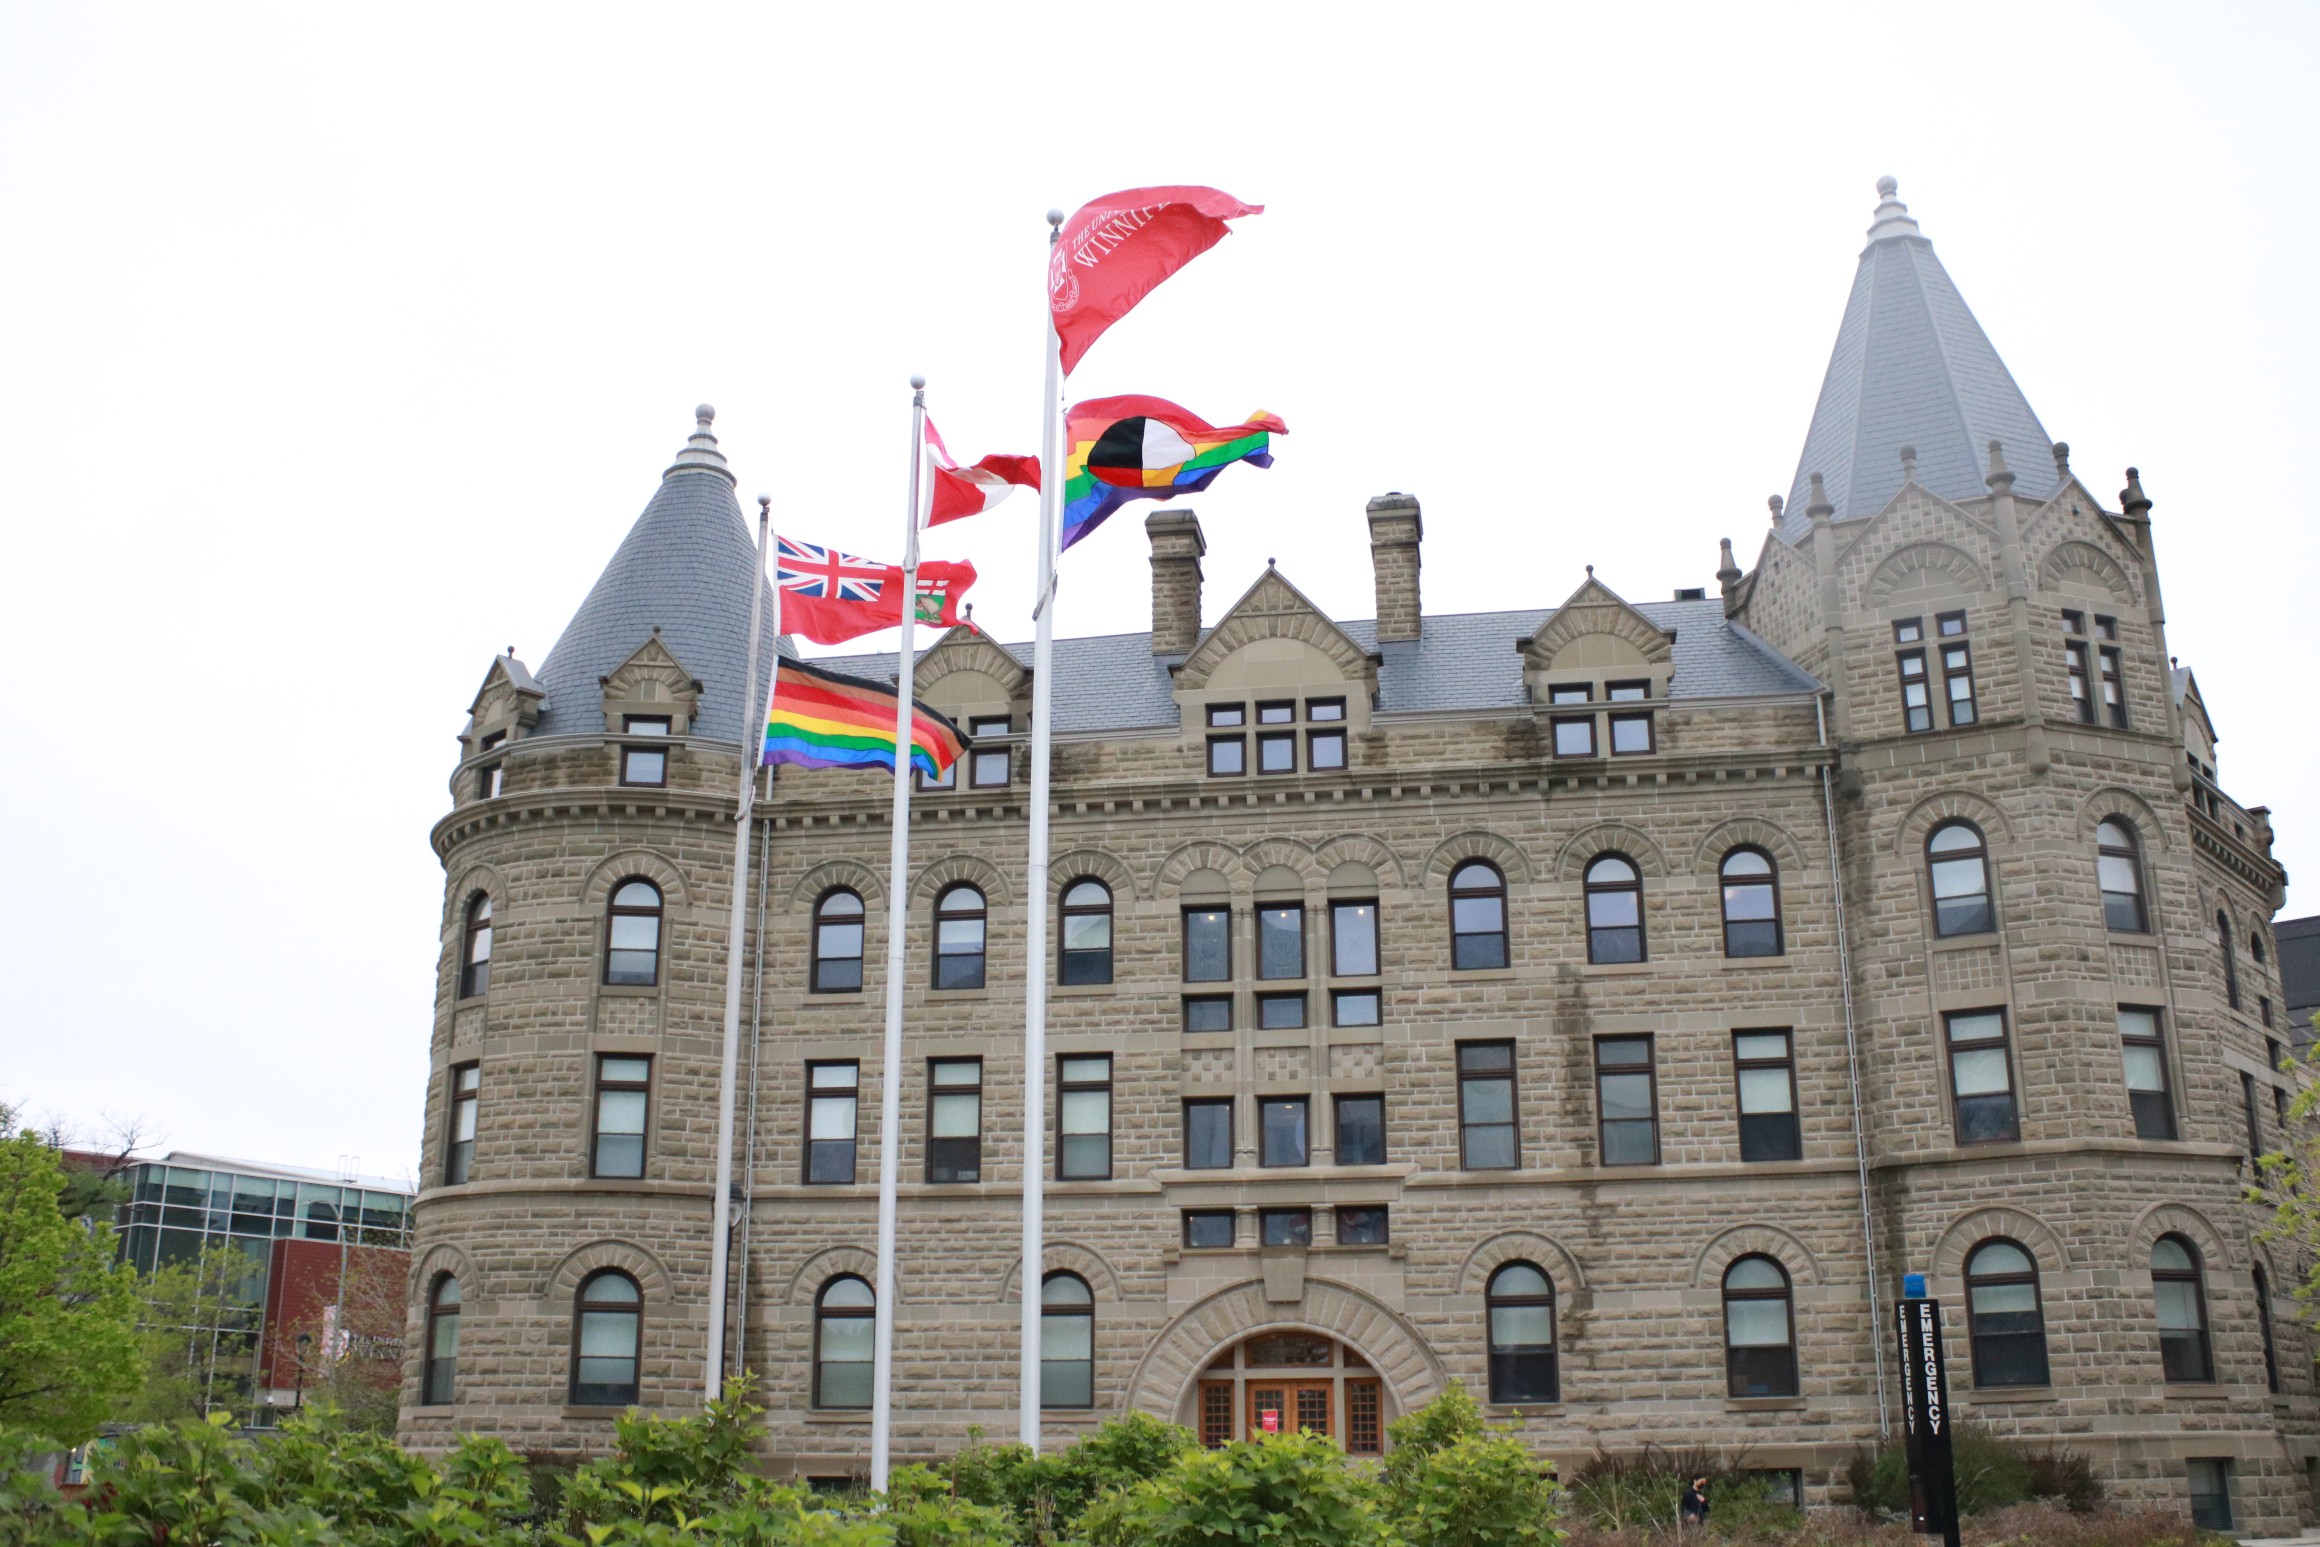 The Progress and Two-Spirit flags flying in front of Wesley Hall.